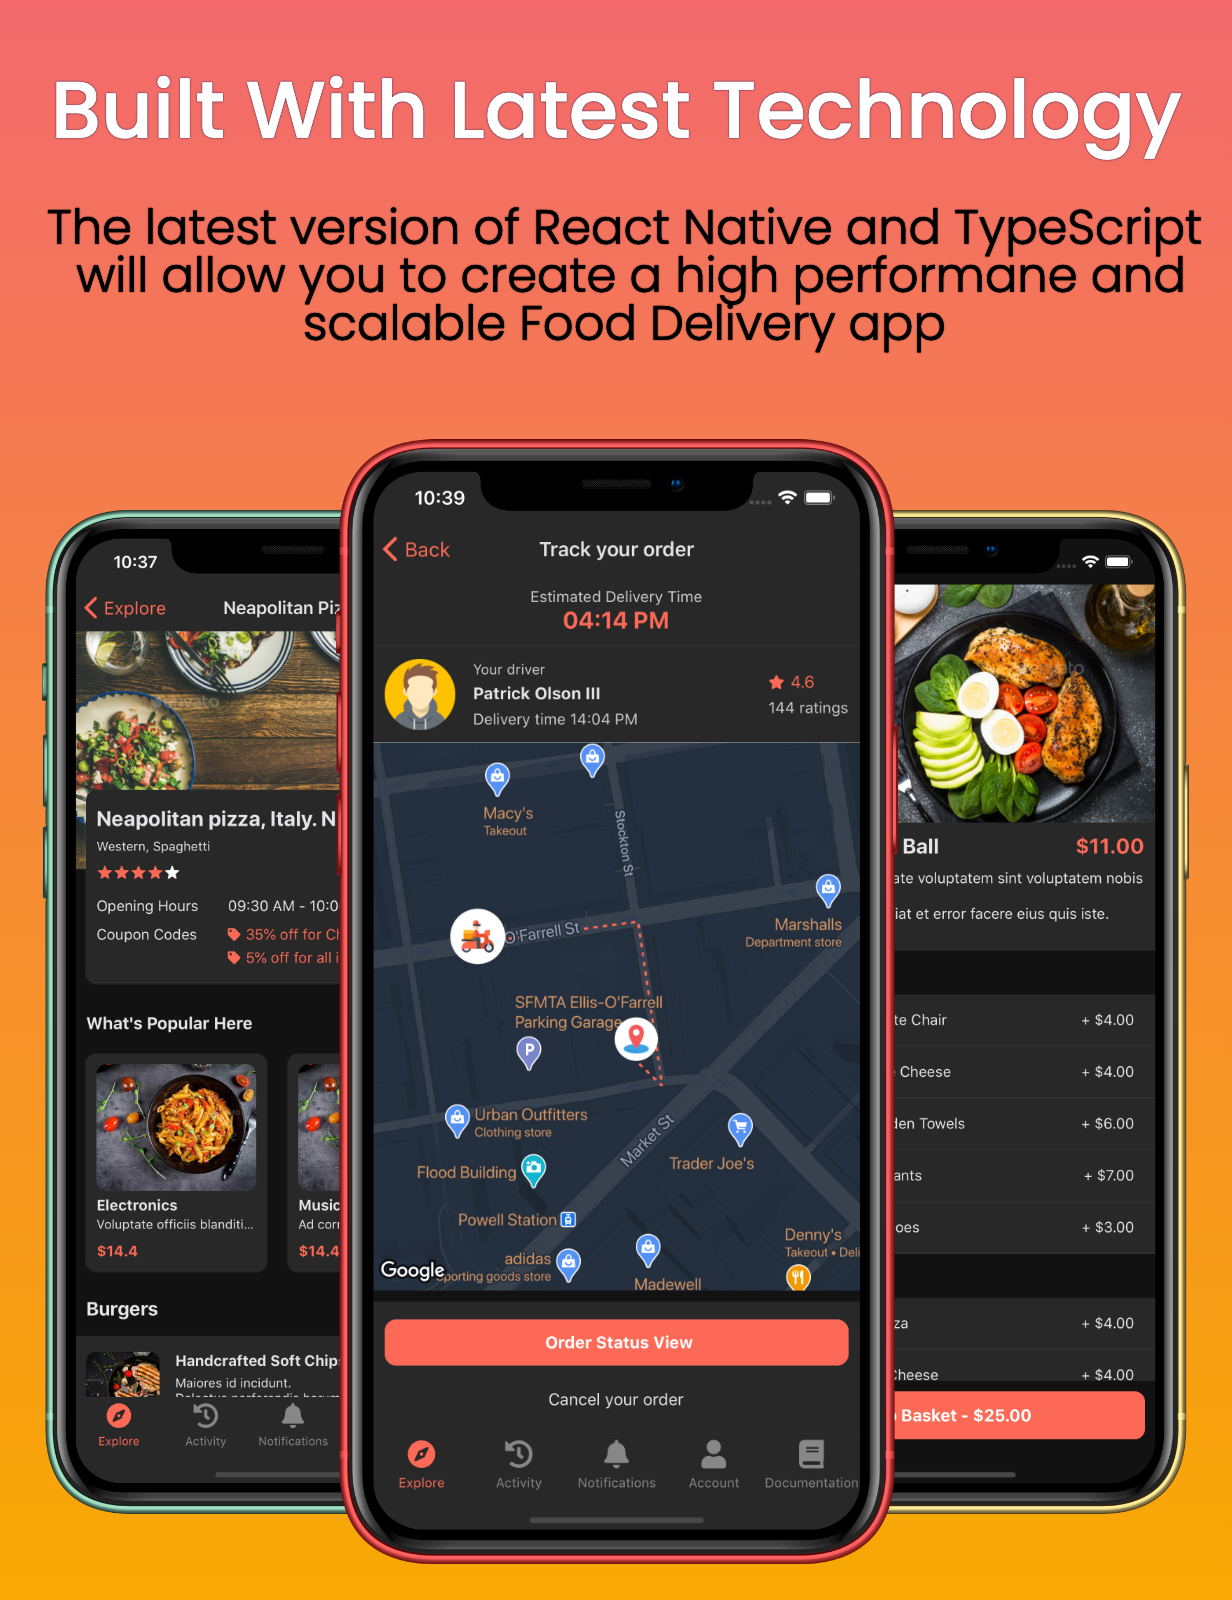 Food Star - Mobile React Native Food Delivery Template - 1